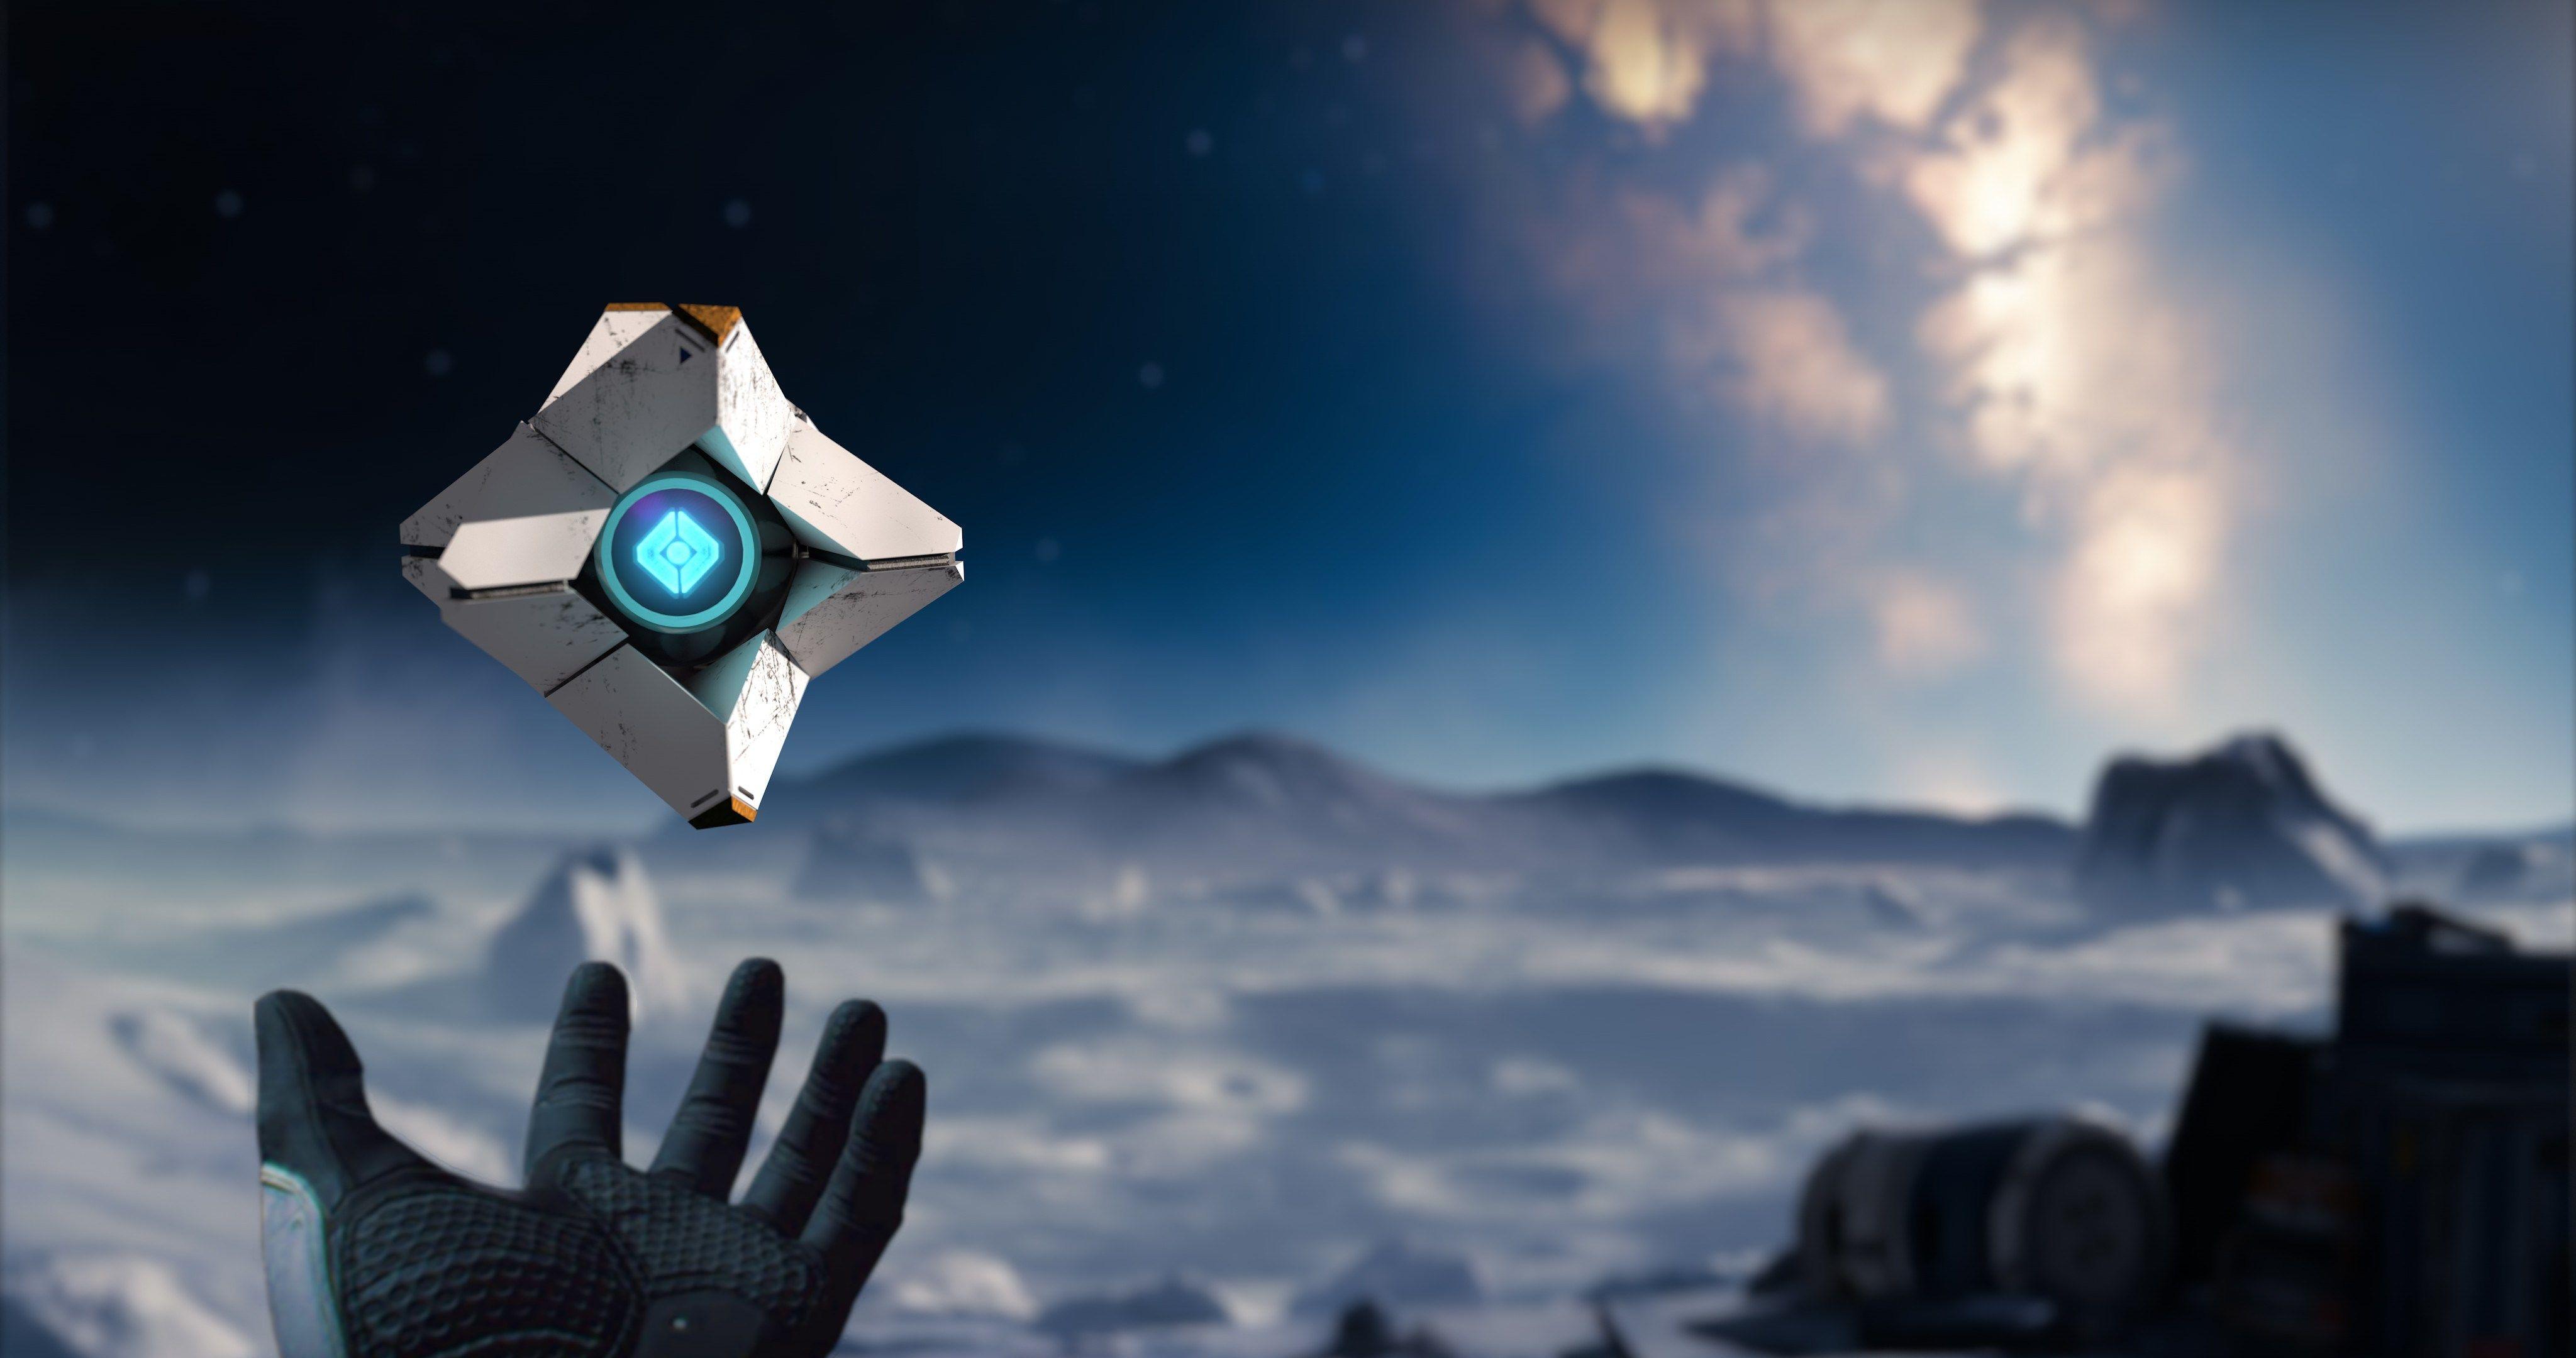 Destiny 2 Ghost Wallpapers - Top Free Destiny 2 Ghost Backgrounds